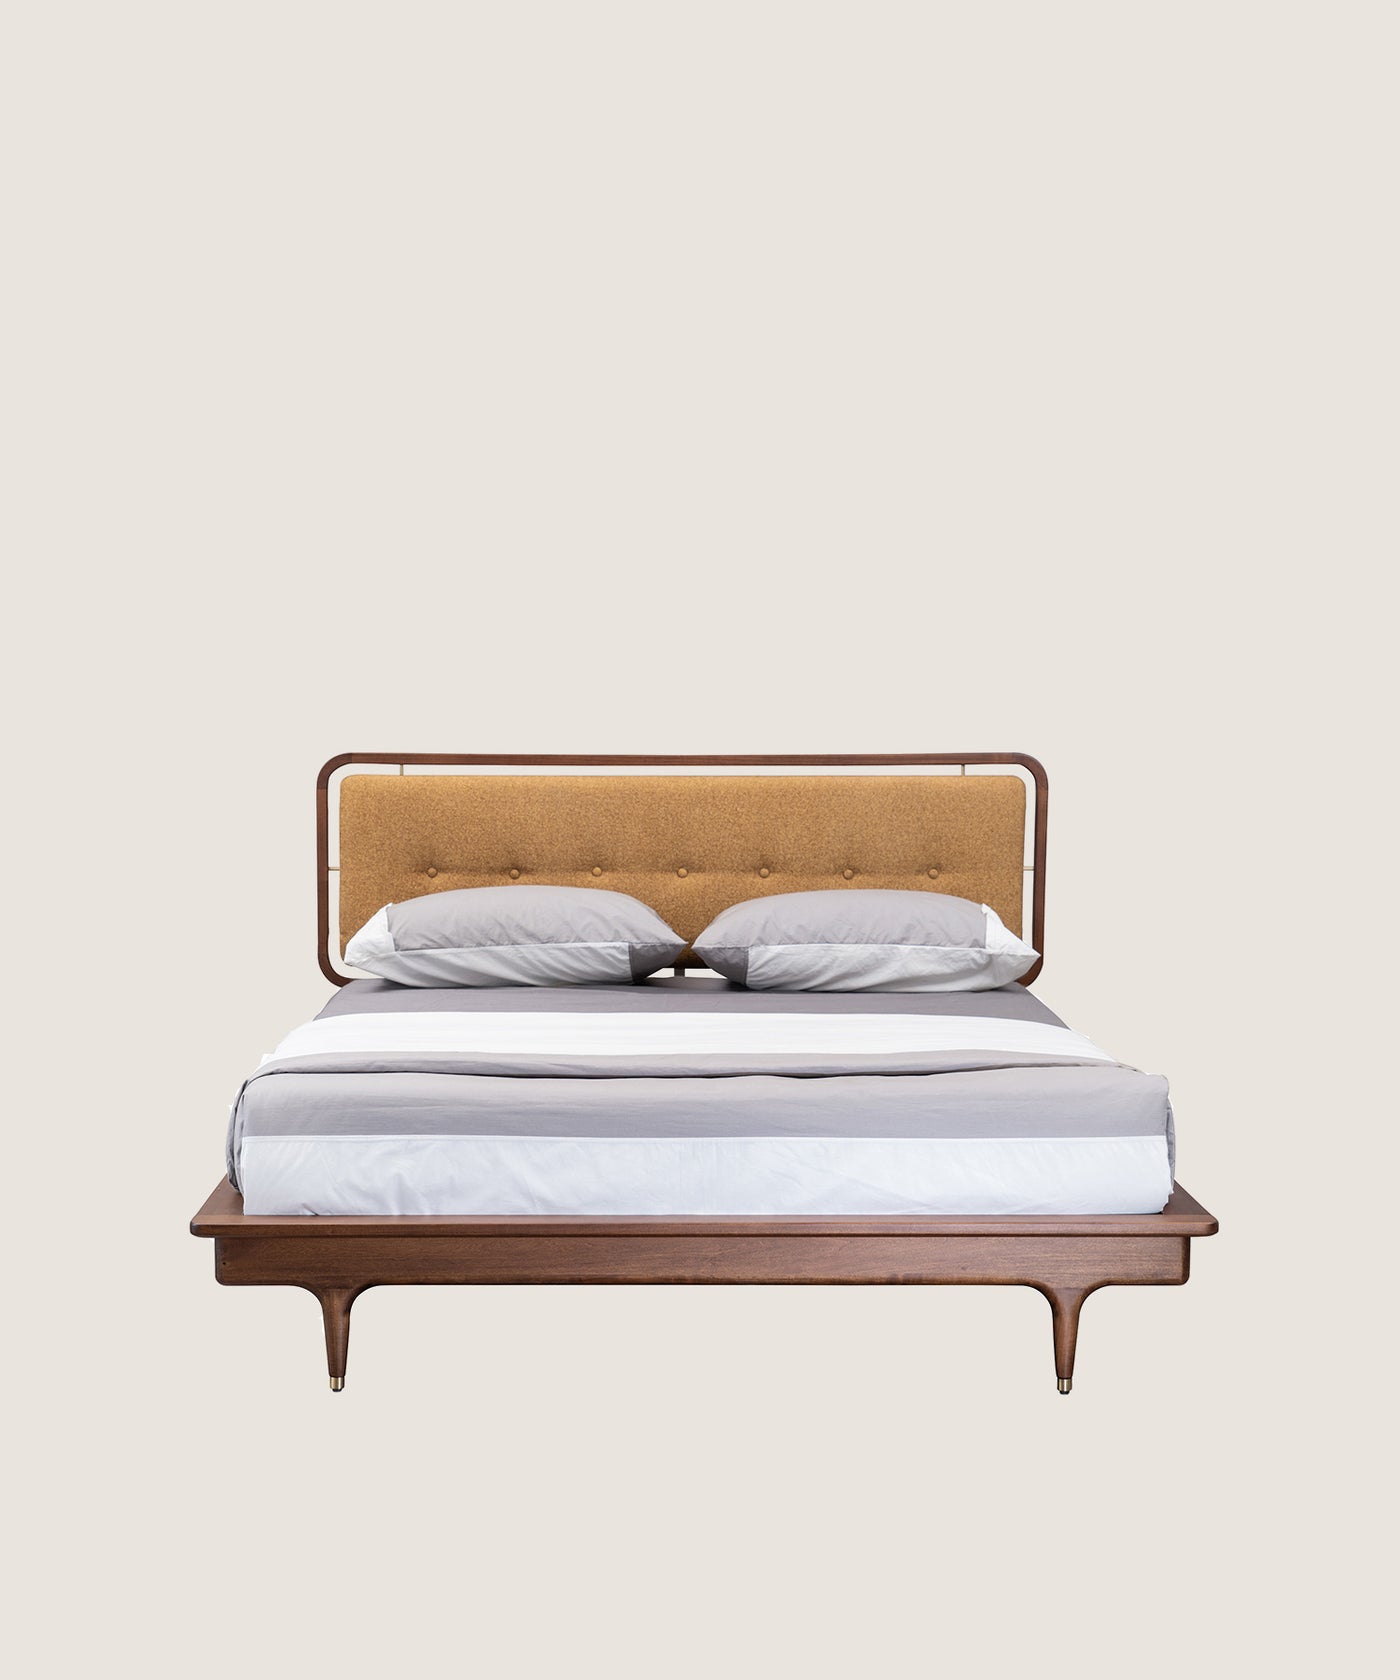 JULIE（ジュリー）ARCH DOUBLE BED FRAME